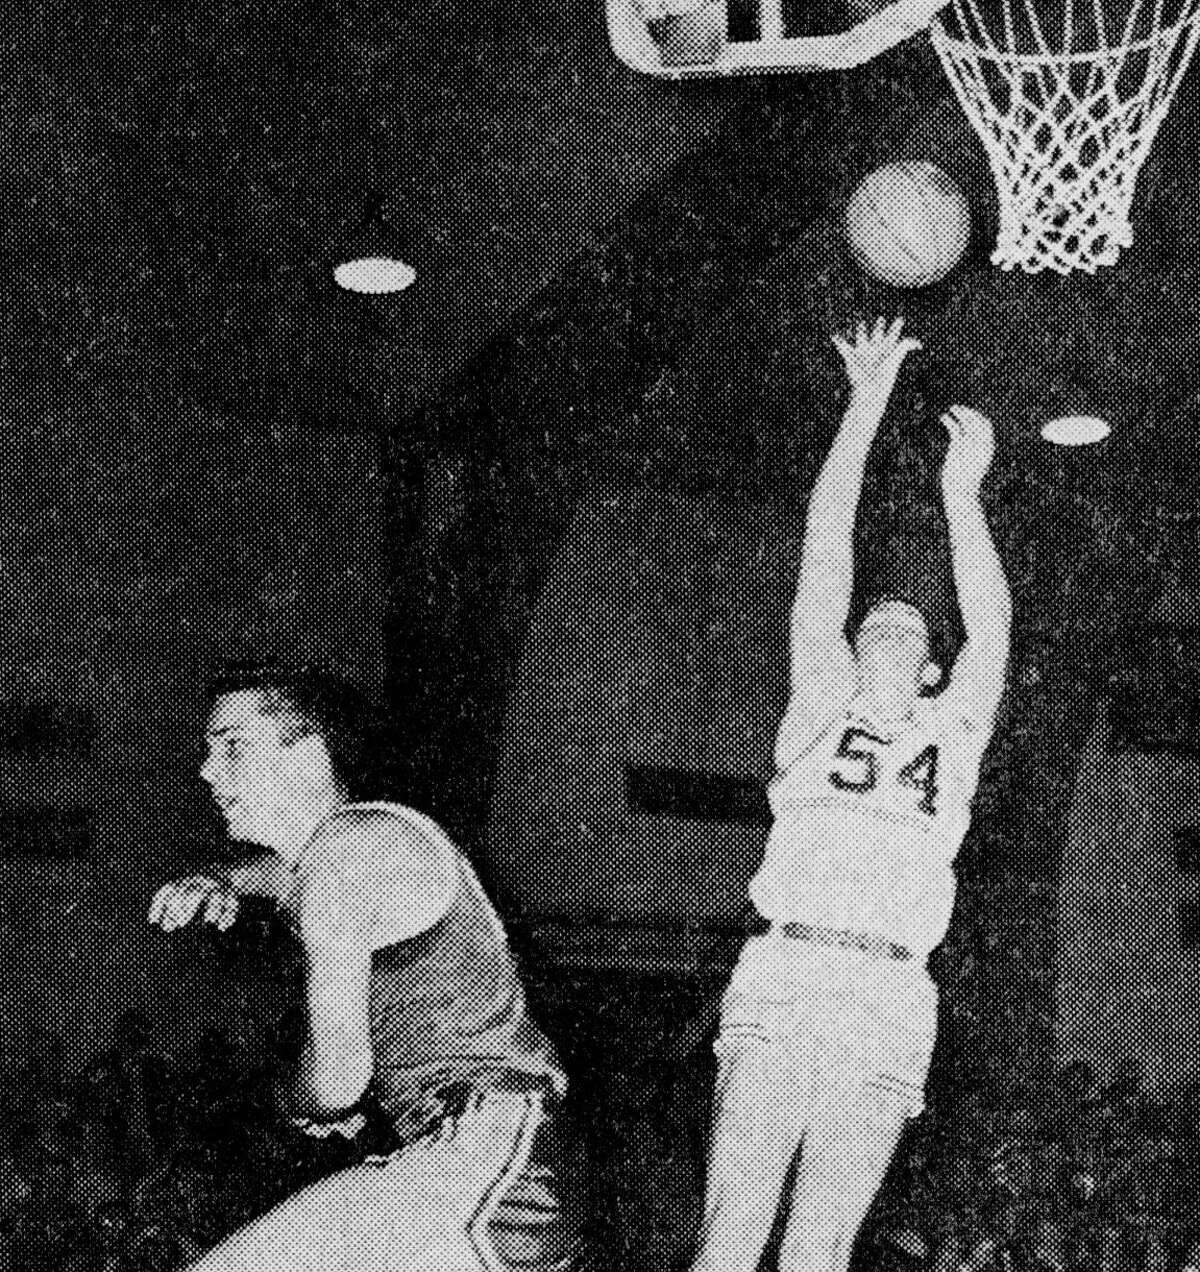 The Scottville player appears to have taking up dancing in preference to guarding Manistee's Jim Ogilvie (54) as he goes up for two points in the game at the Armory last night which saw the Chippewas win by a score of 72-60. The photo was published in the News Advocate on Dec. 22, 1962.